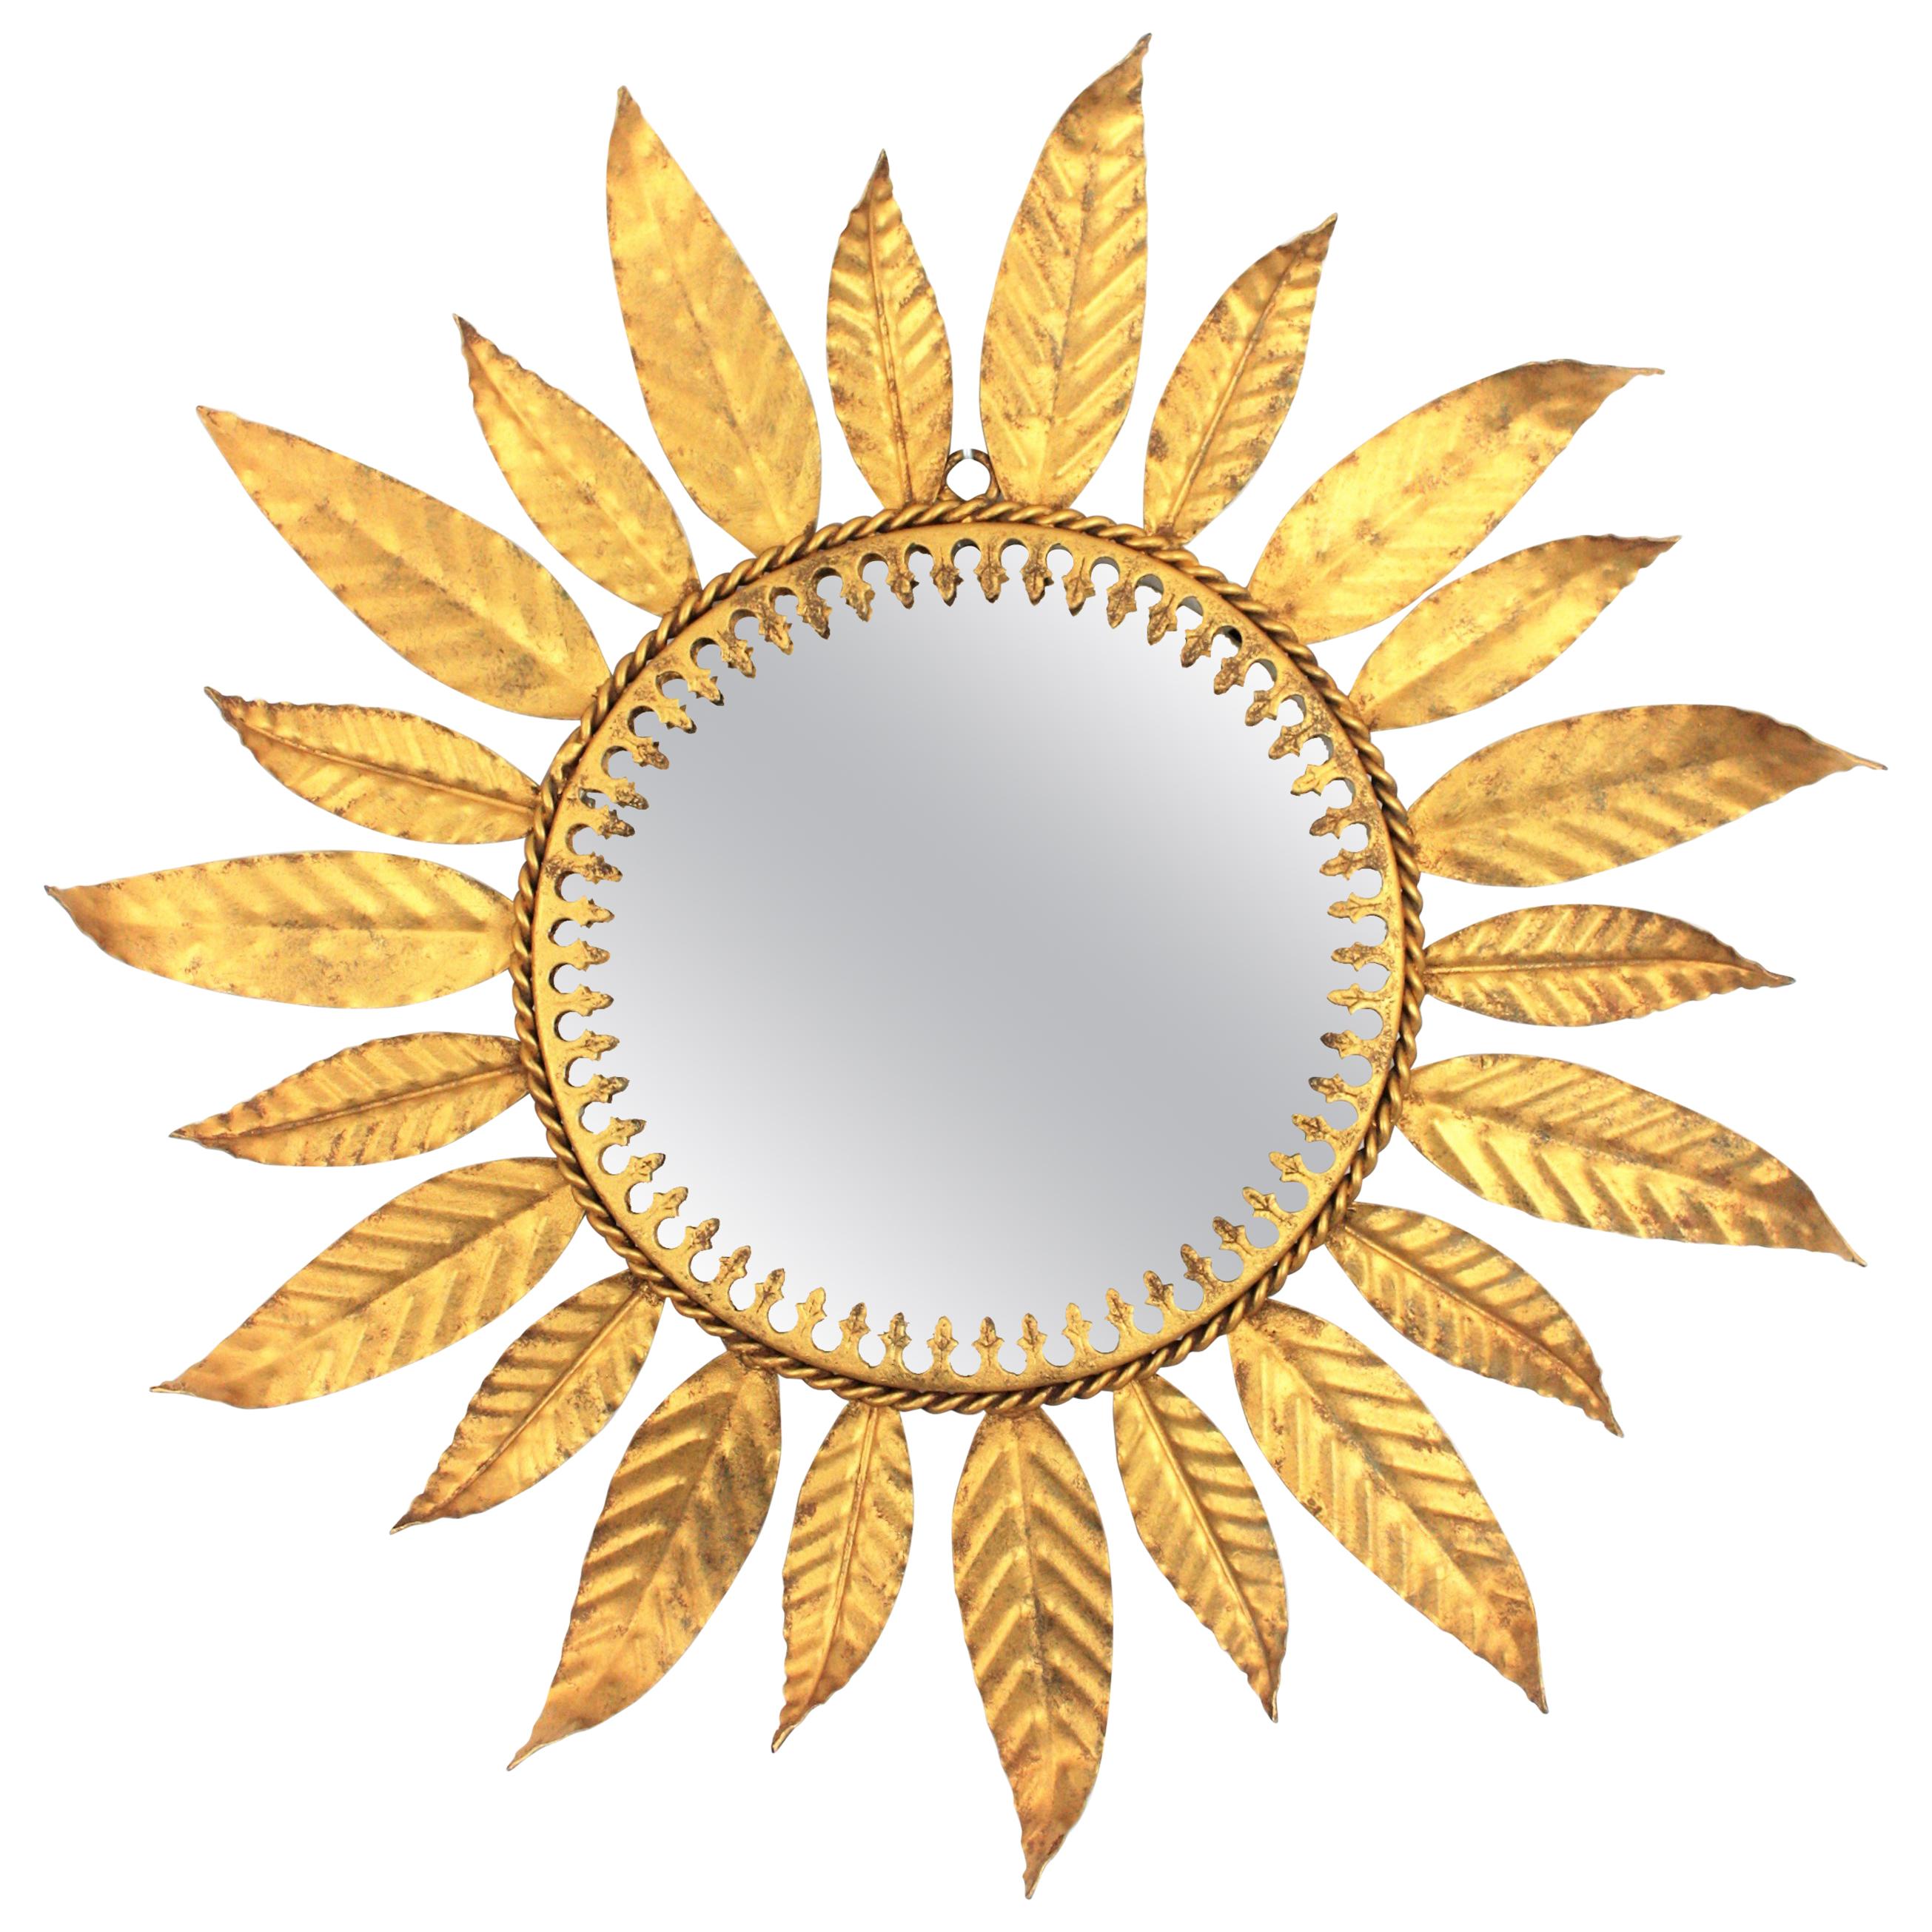 Eye-catching midcentury gilt iron sunburst mirror framed by Laurel leaves. Spain, 1960s.
Beautiful placed alone or as a part of a wall composition with other mirrors in the manner as we show at the images
Overall measures: 45 cm diameter x 2.5 cm